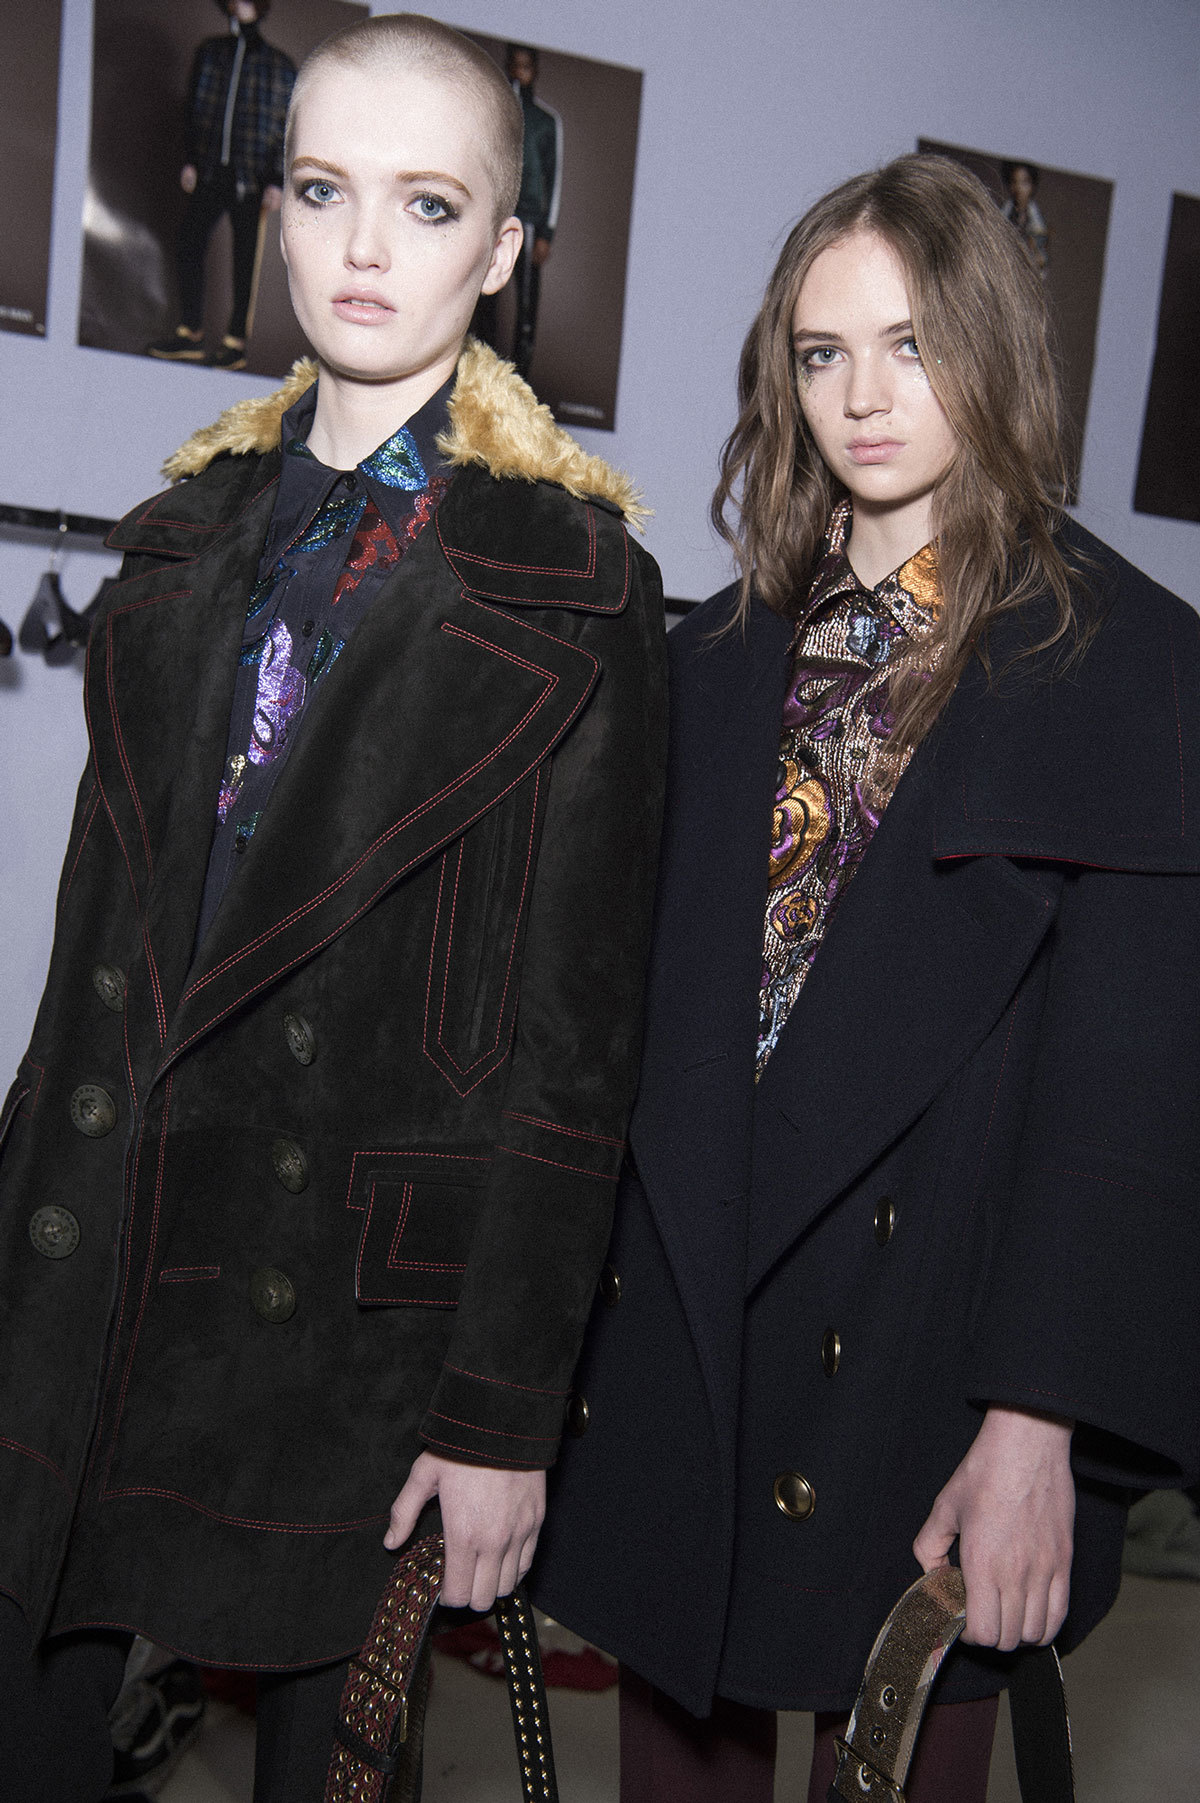 burberry's glam military takes fall/winter 16 - i-D